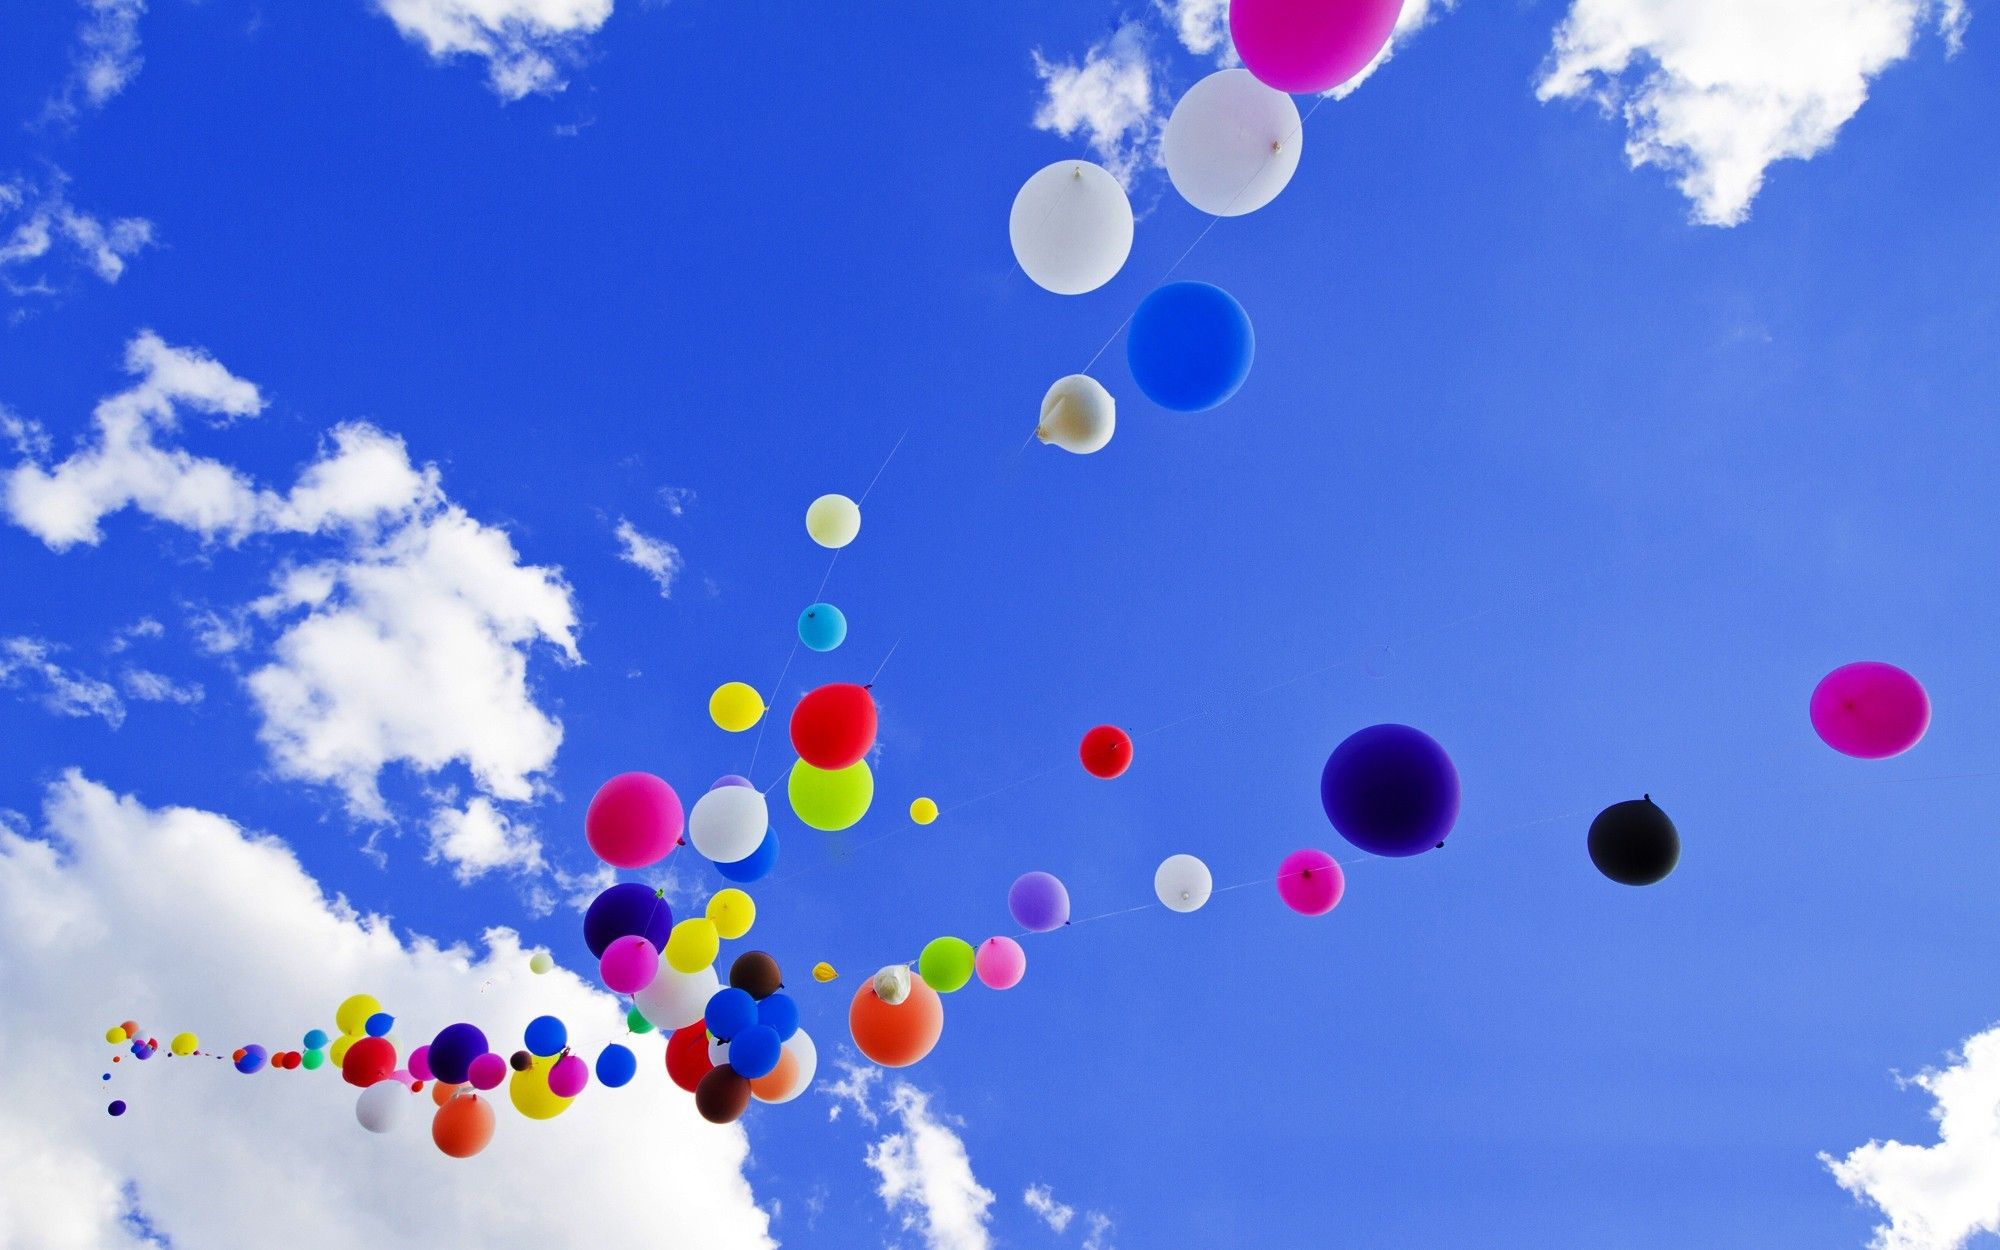 Colorful, Balloons, On, Blue, Sky .thewallpaper.co